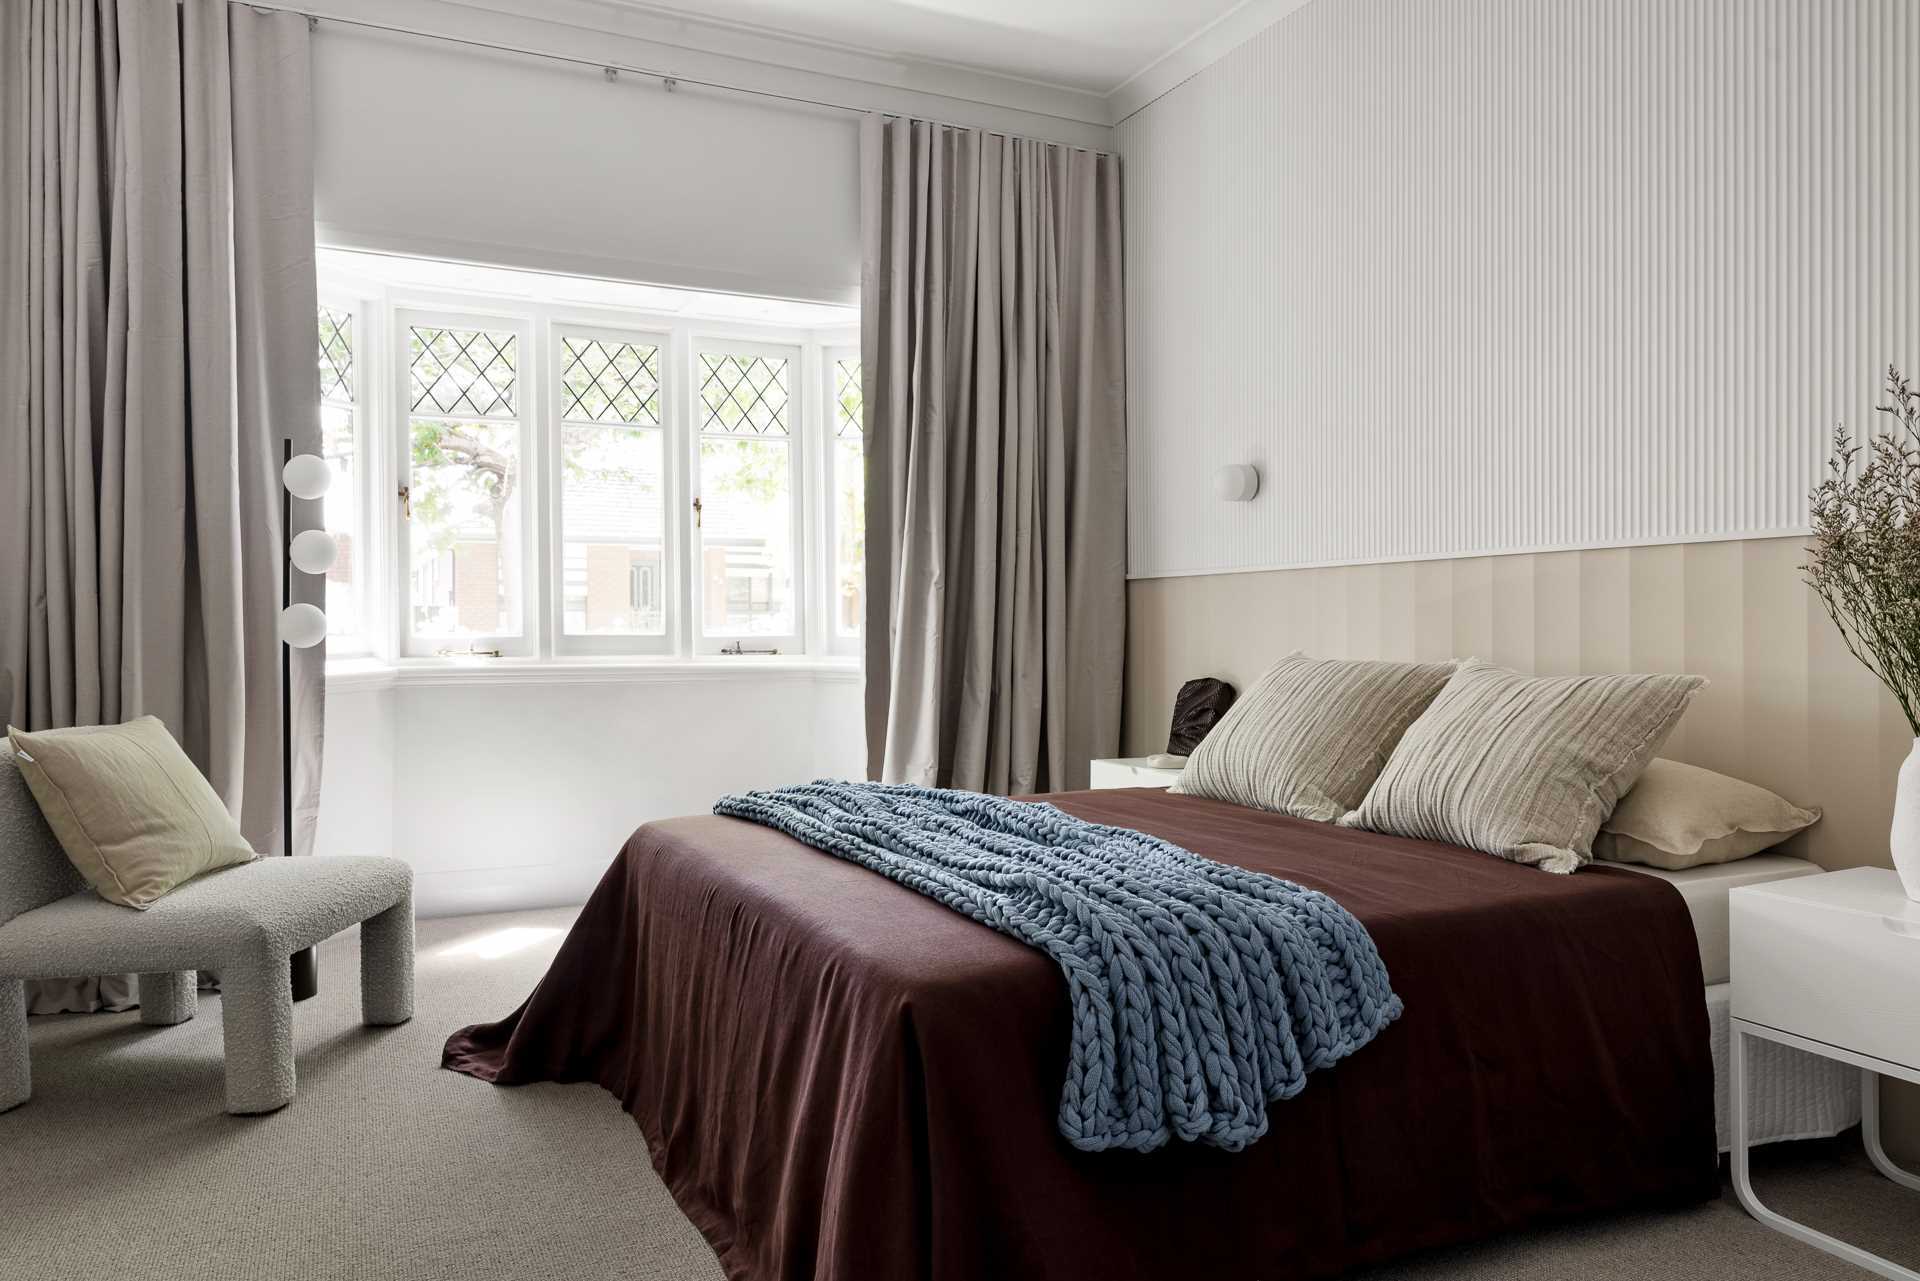 In this bedroom, a textured wall has been added to create visual interest.